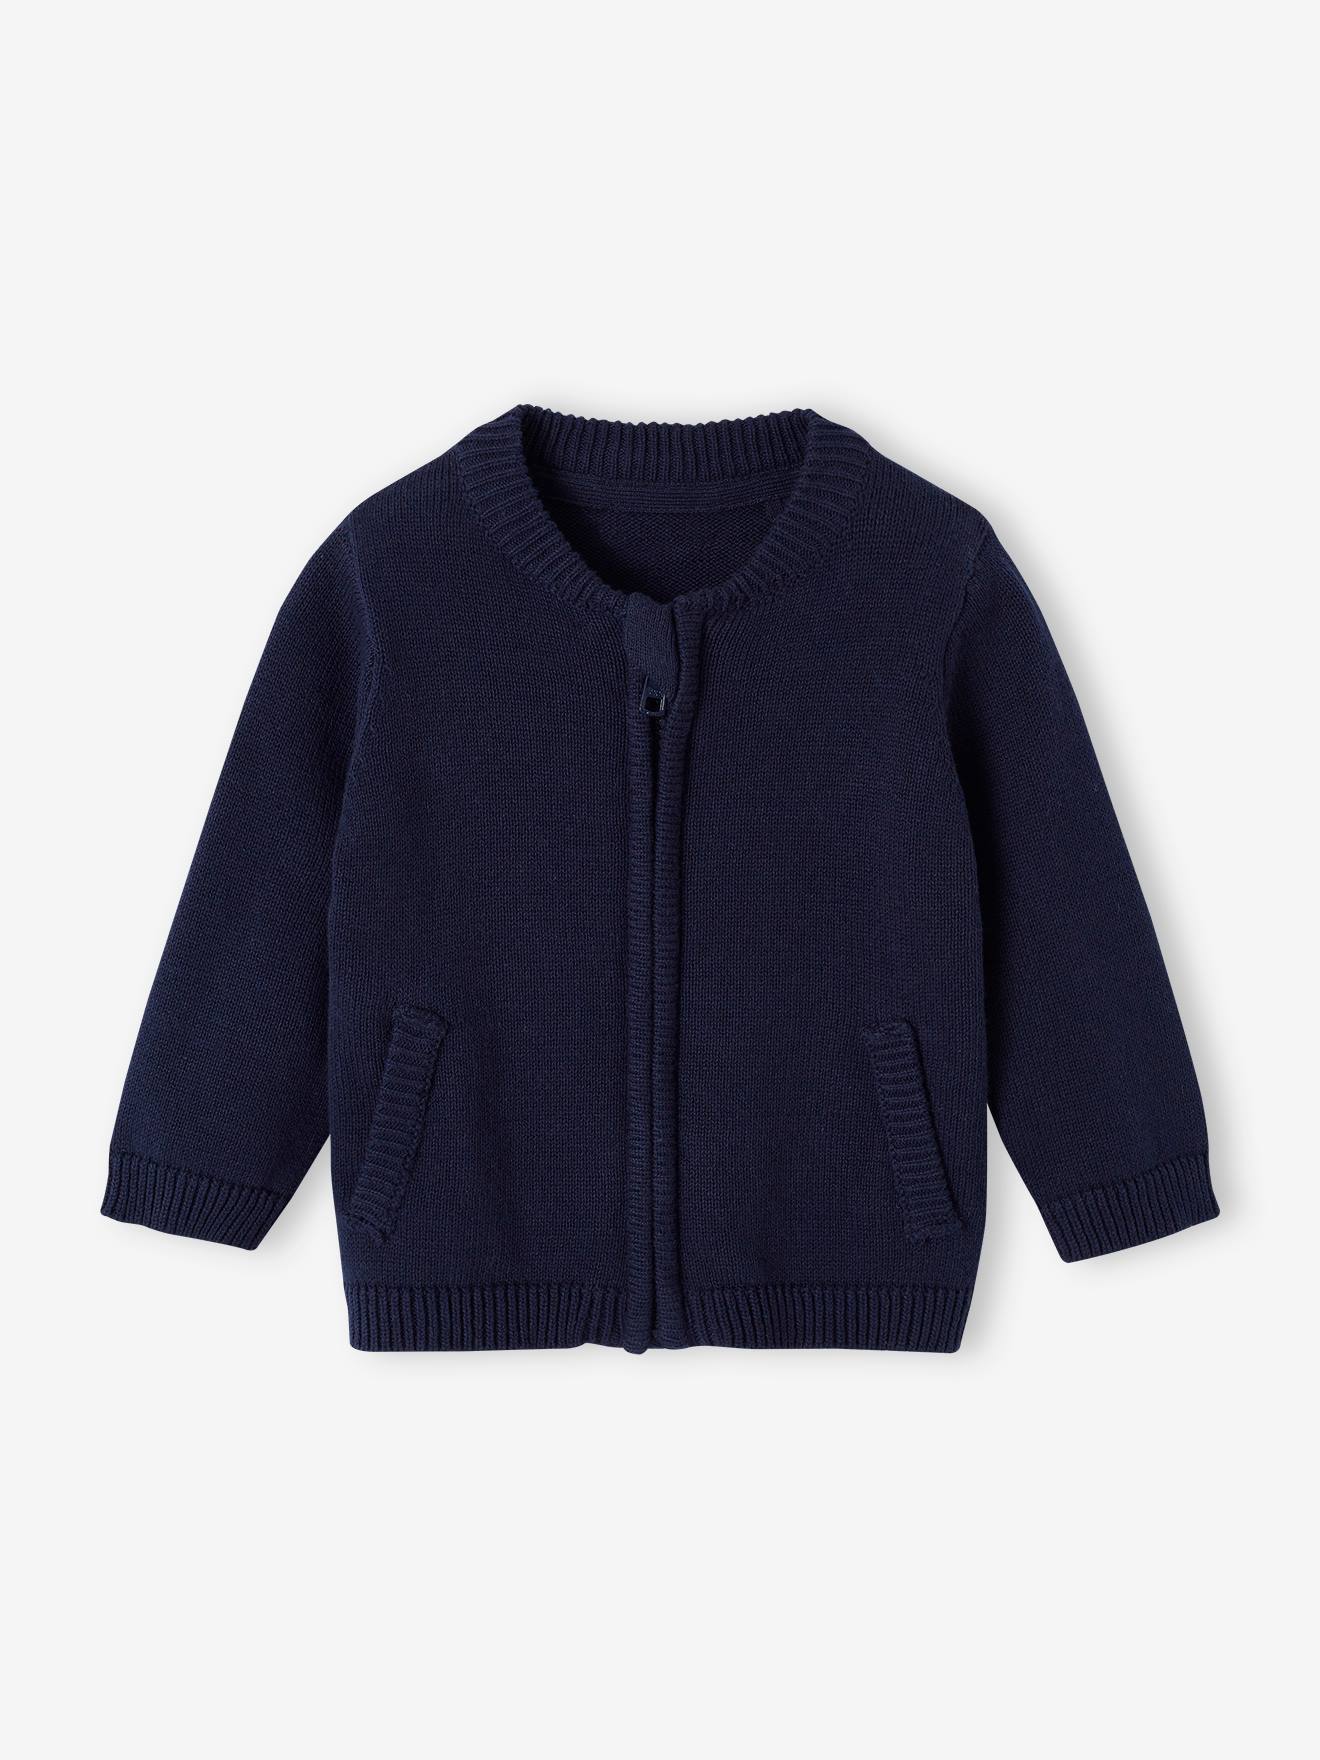 Zipped College-Style Cardigan for Babies navy blue